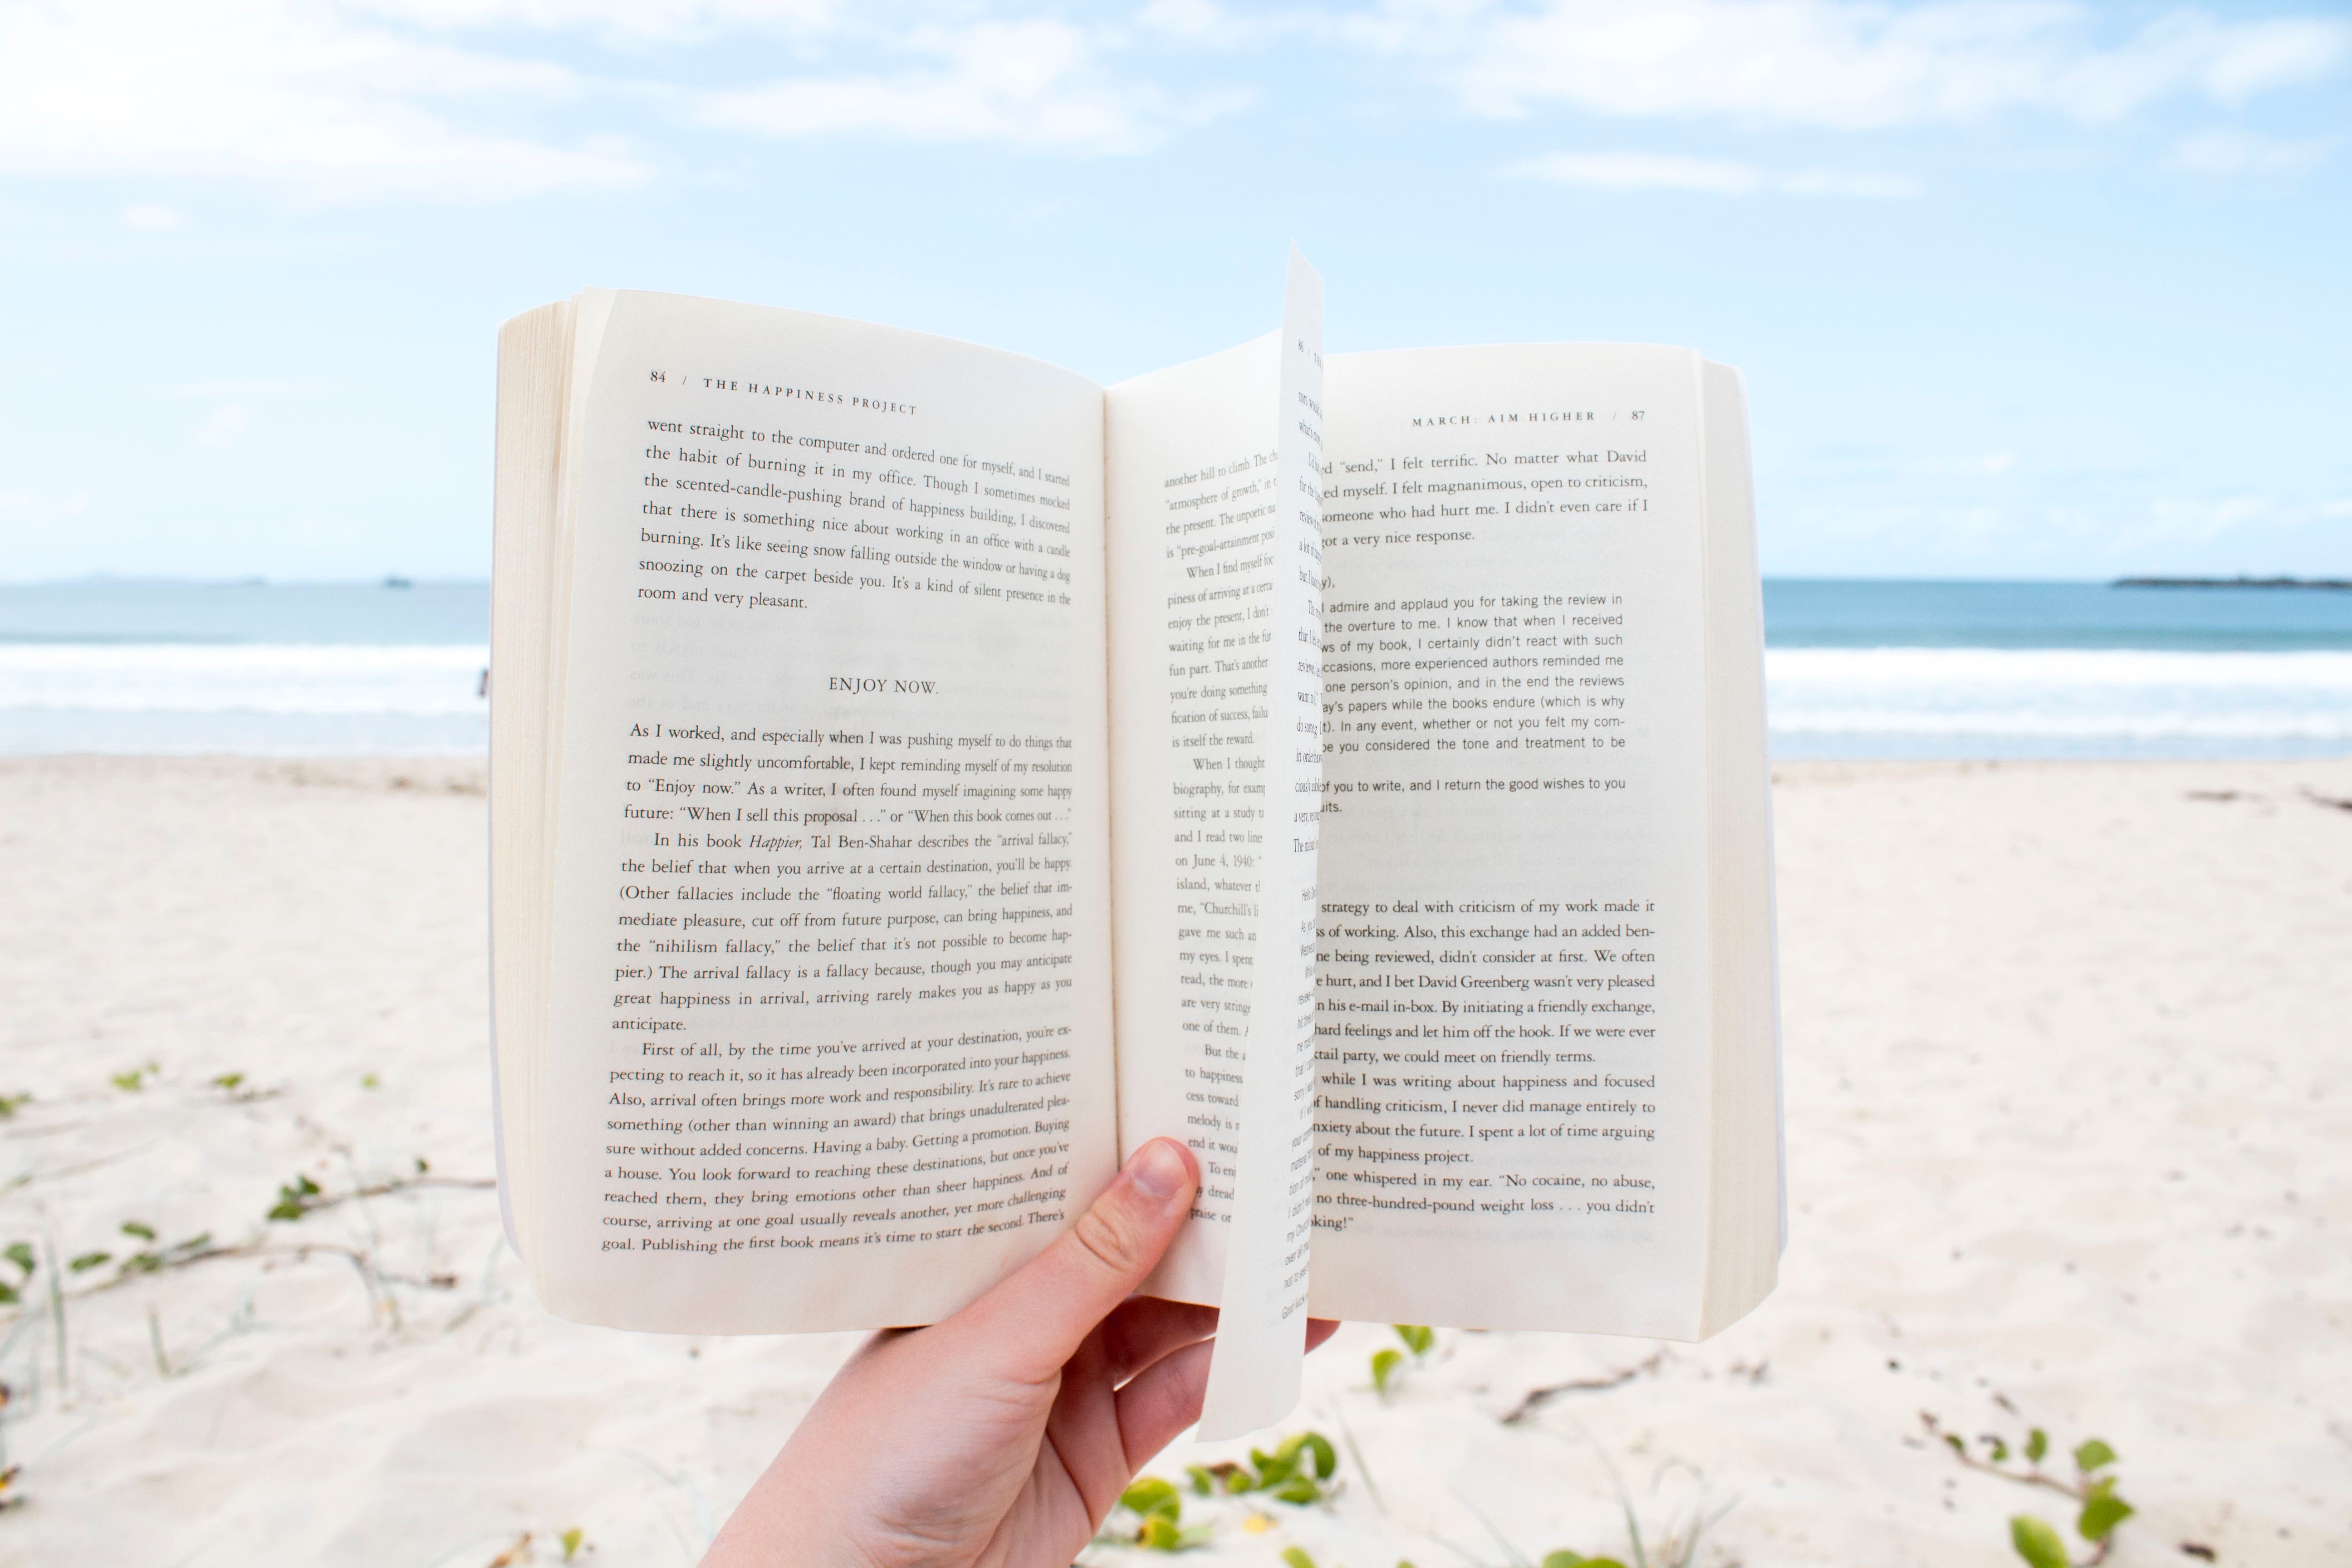 Our 2019 Summer Reading List